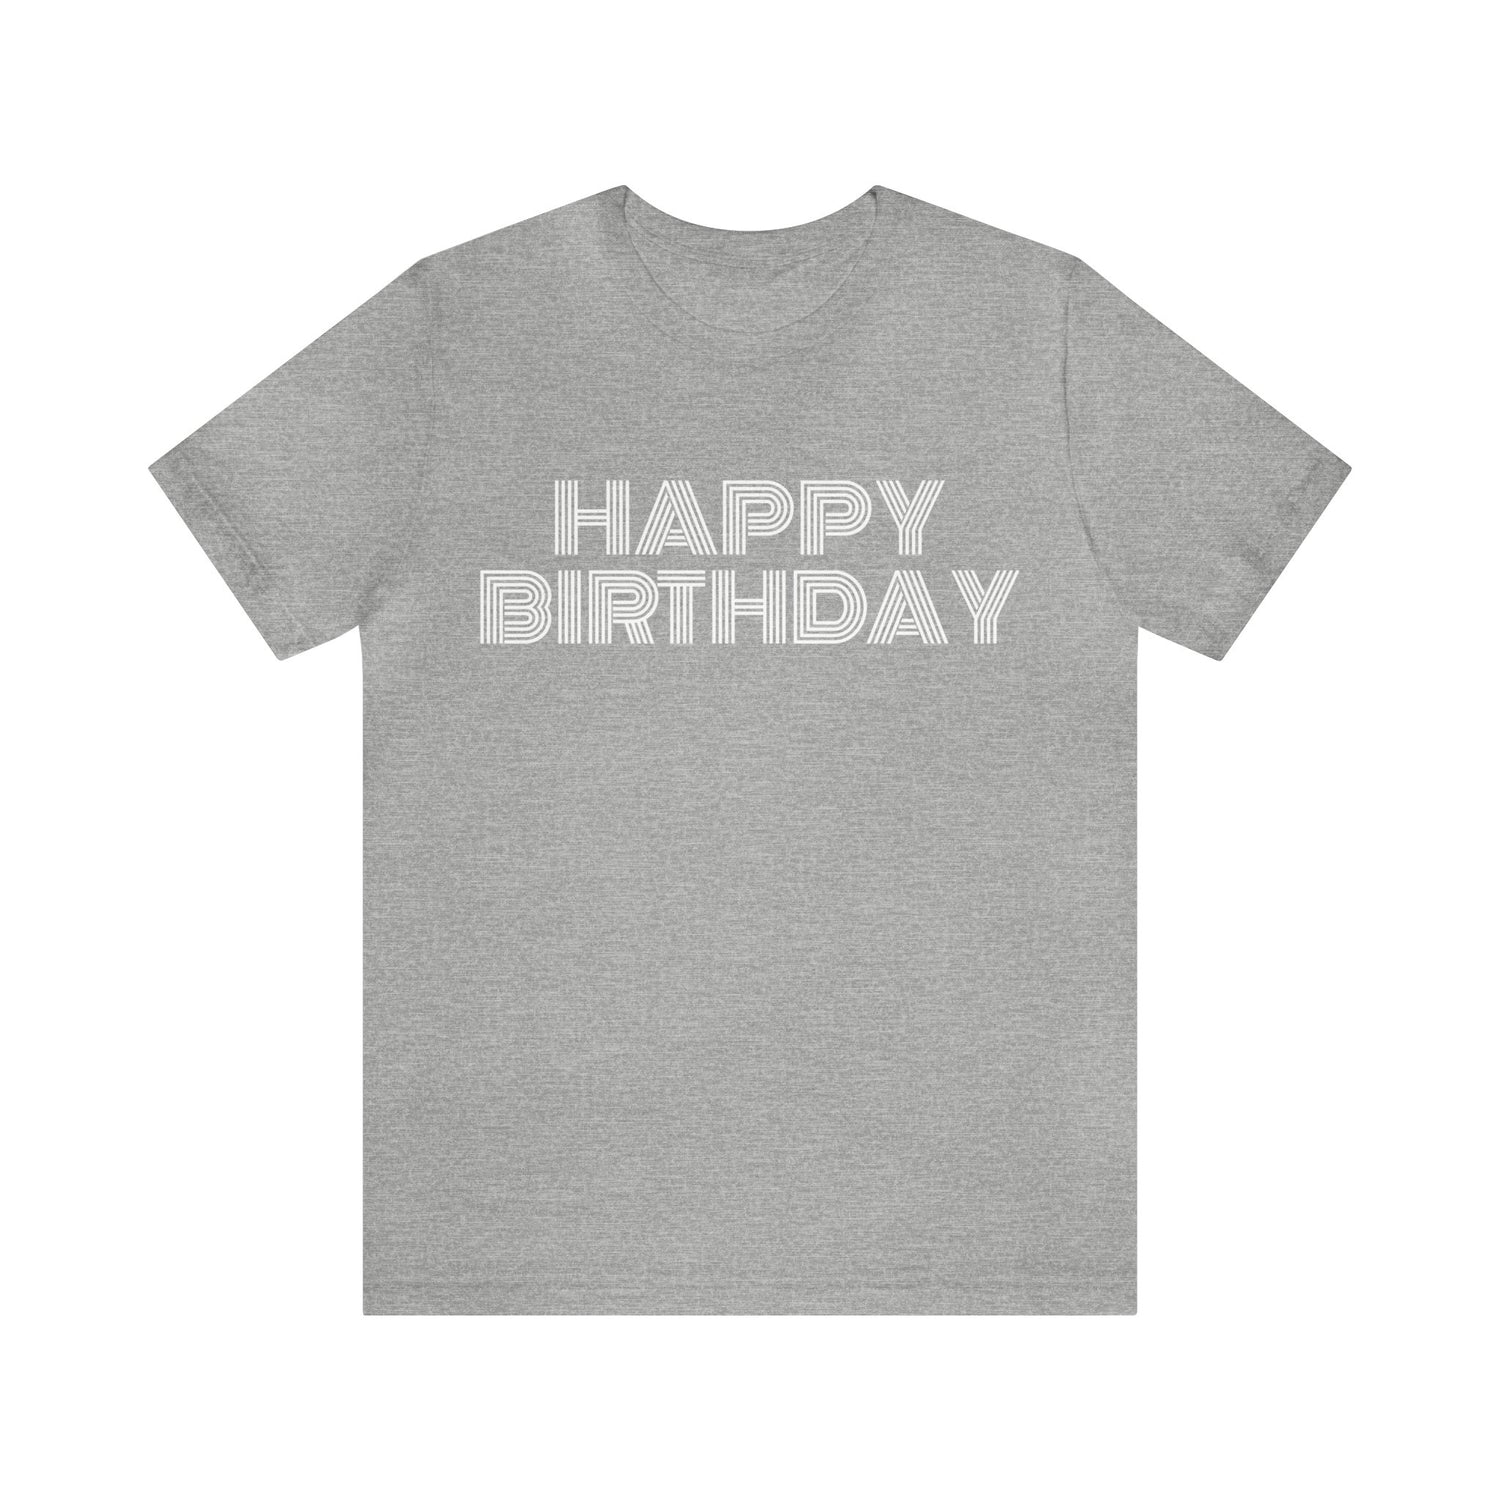 Athletic Heather T-Shirt Tshirt Gift for Friends and Family Short Sleeve T Shirt Birthday Petrova Designs